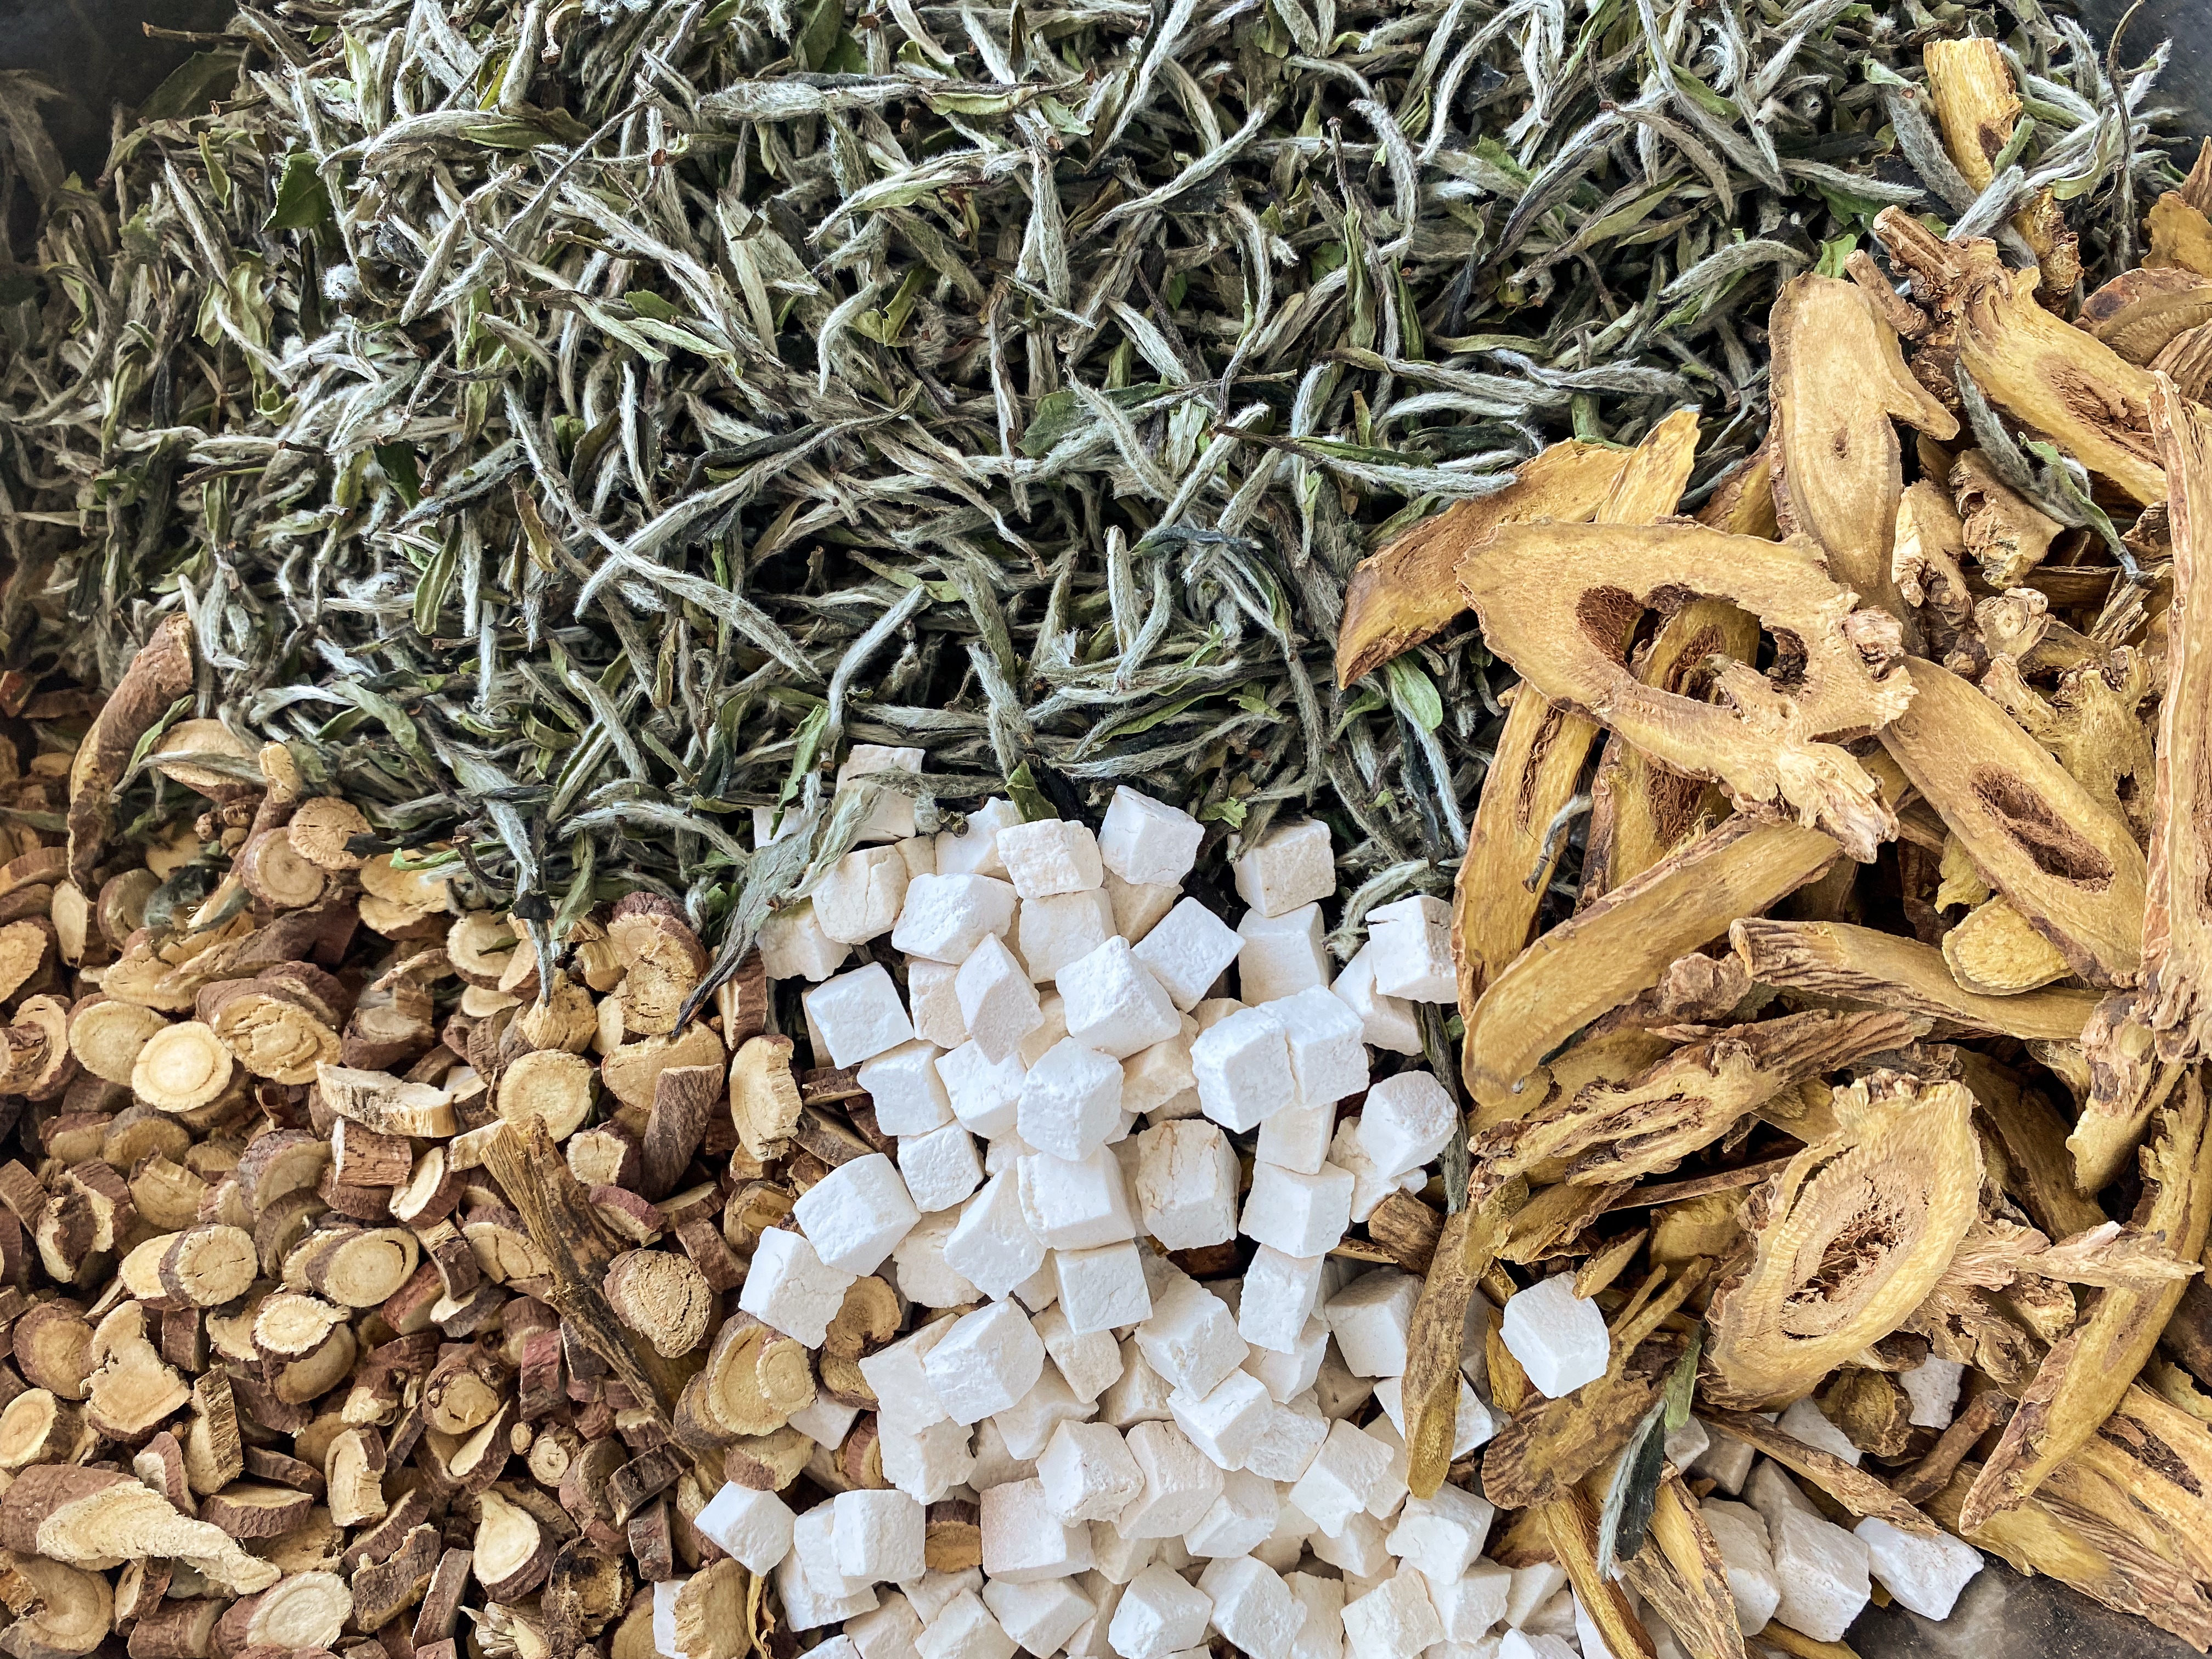 Natural Chinese medicinal herbs and botanicals like white tea, poria mushroom, licorice root, and ophiopogon tuber can be found in YINA skincare products.